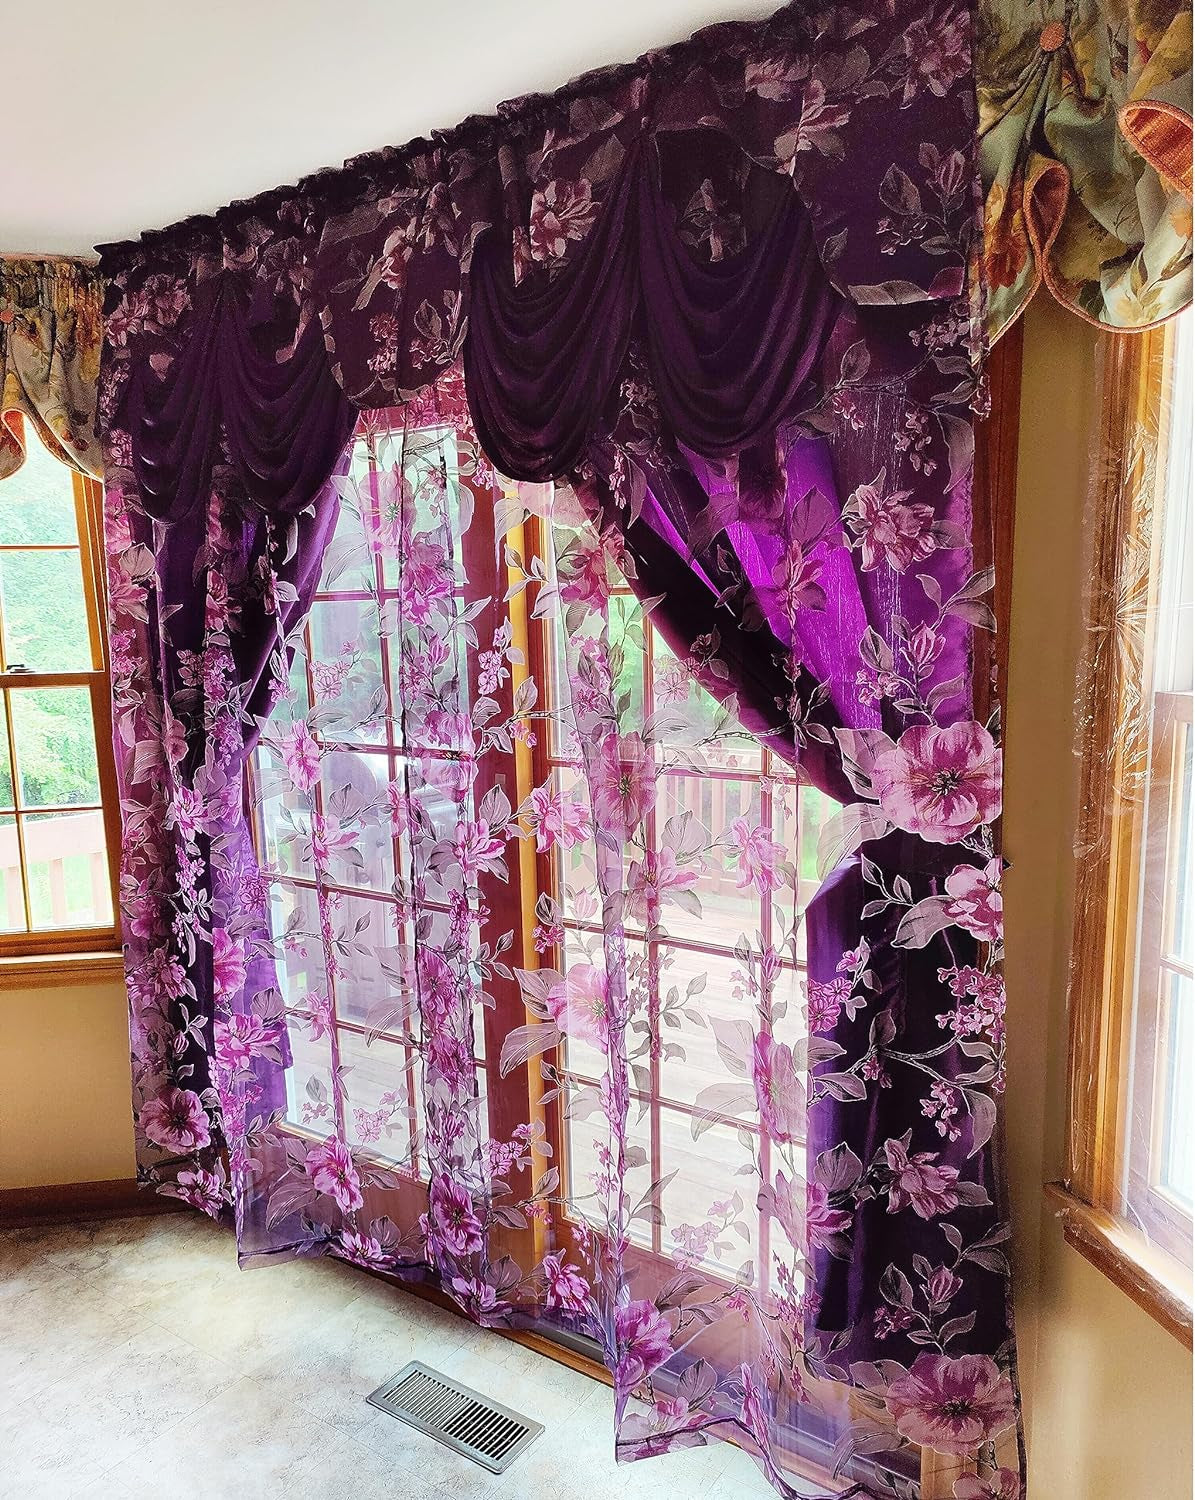 GOHD Roman Romance. Burnt-Out Printed Organza Window Curtain Panel Drape with Attached Fancy Valance and Taffeta Backing (Purple, 55 X 84 Inches + Attached Valance X 2Pcs)